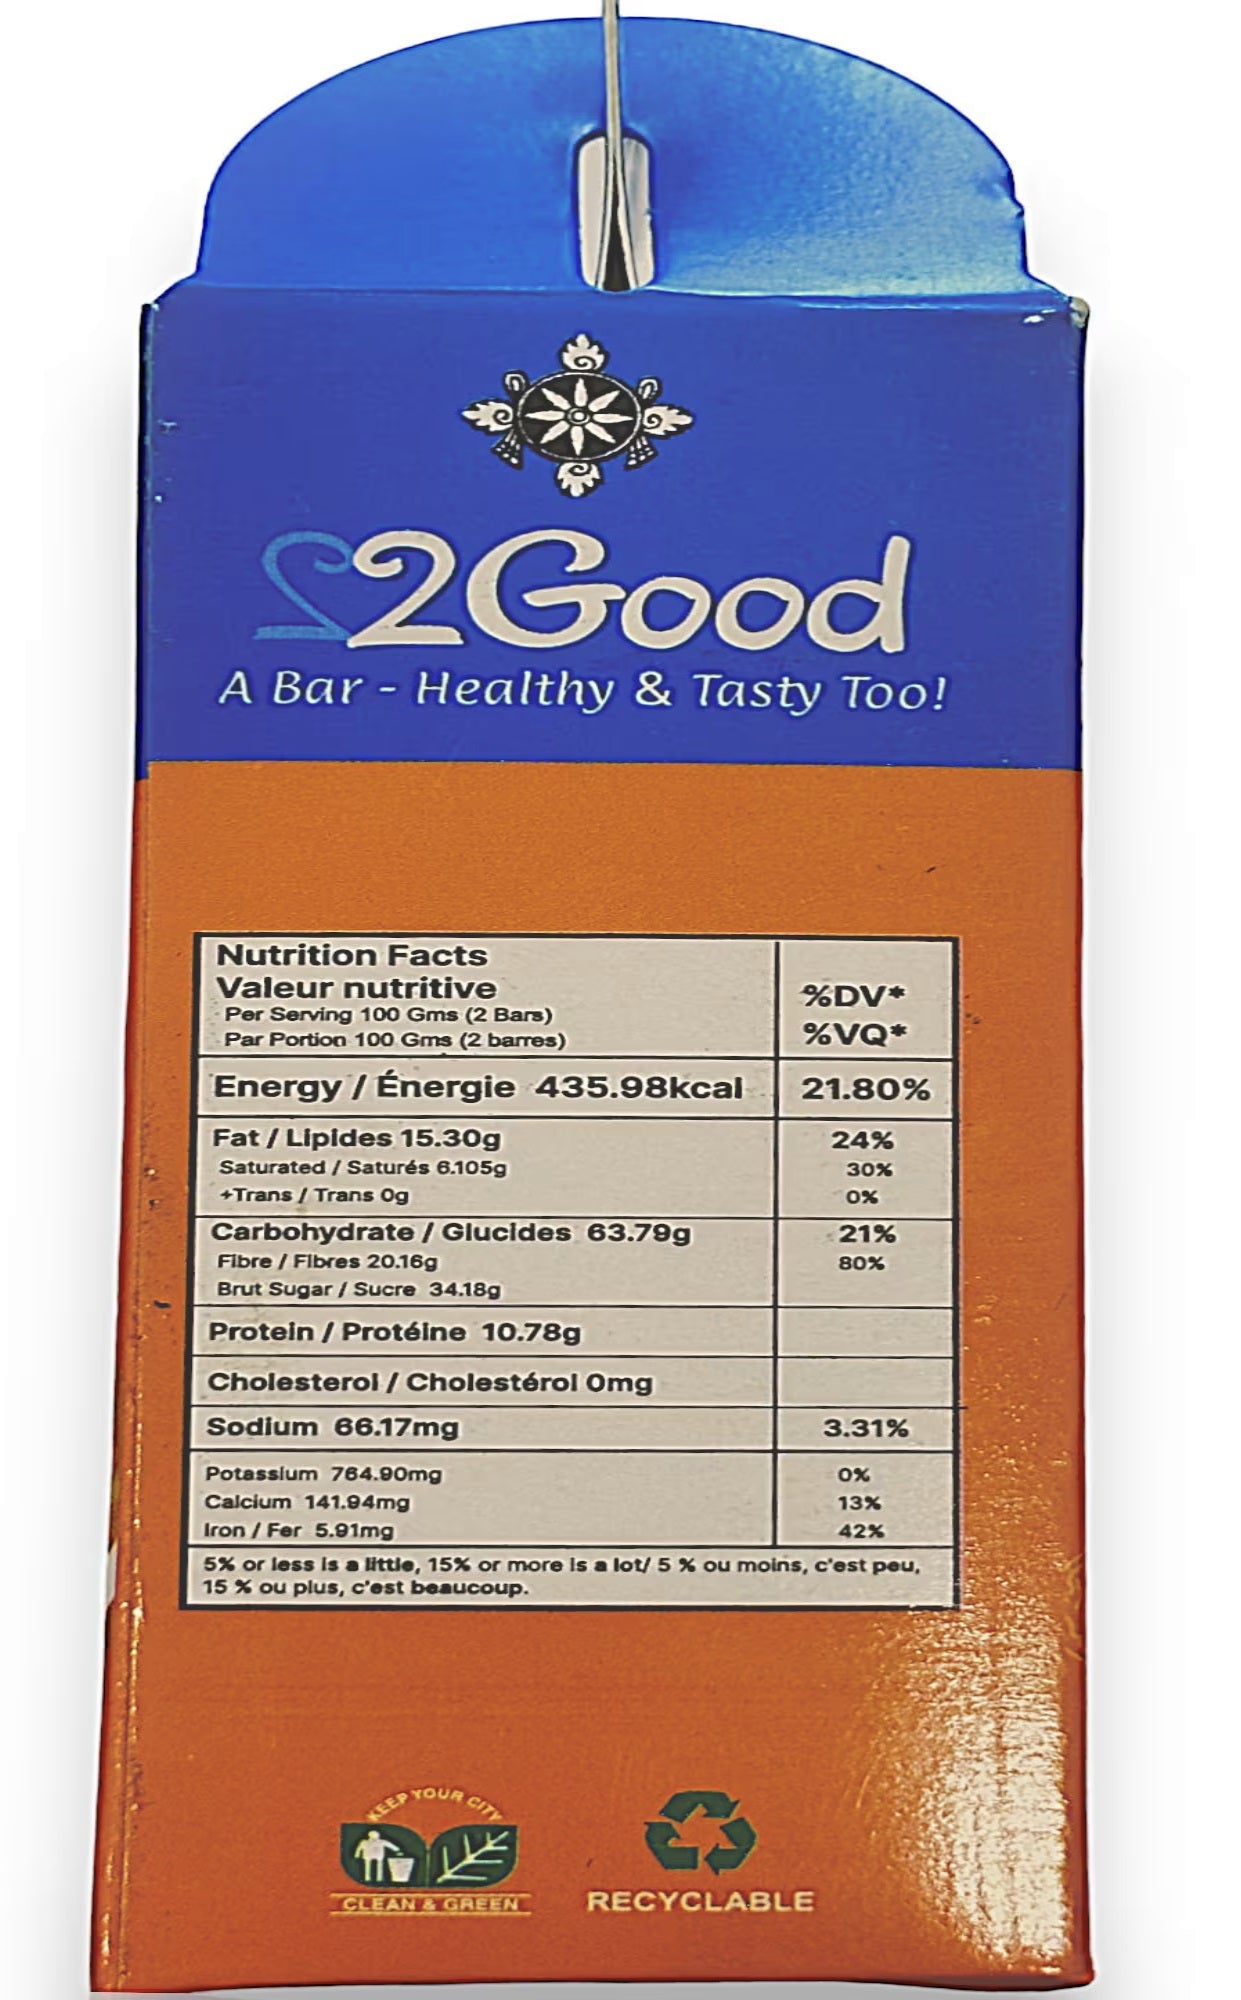 2Good  A Bar - Healthy and Tasty Too 12Pack. Naturally, Juicy & Crunchy!  6g Protein | 200 Cals|  20g Fibre| No Chemicals| Fit for Fasting